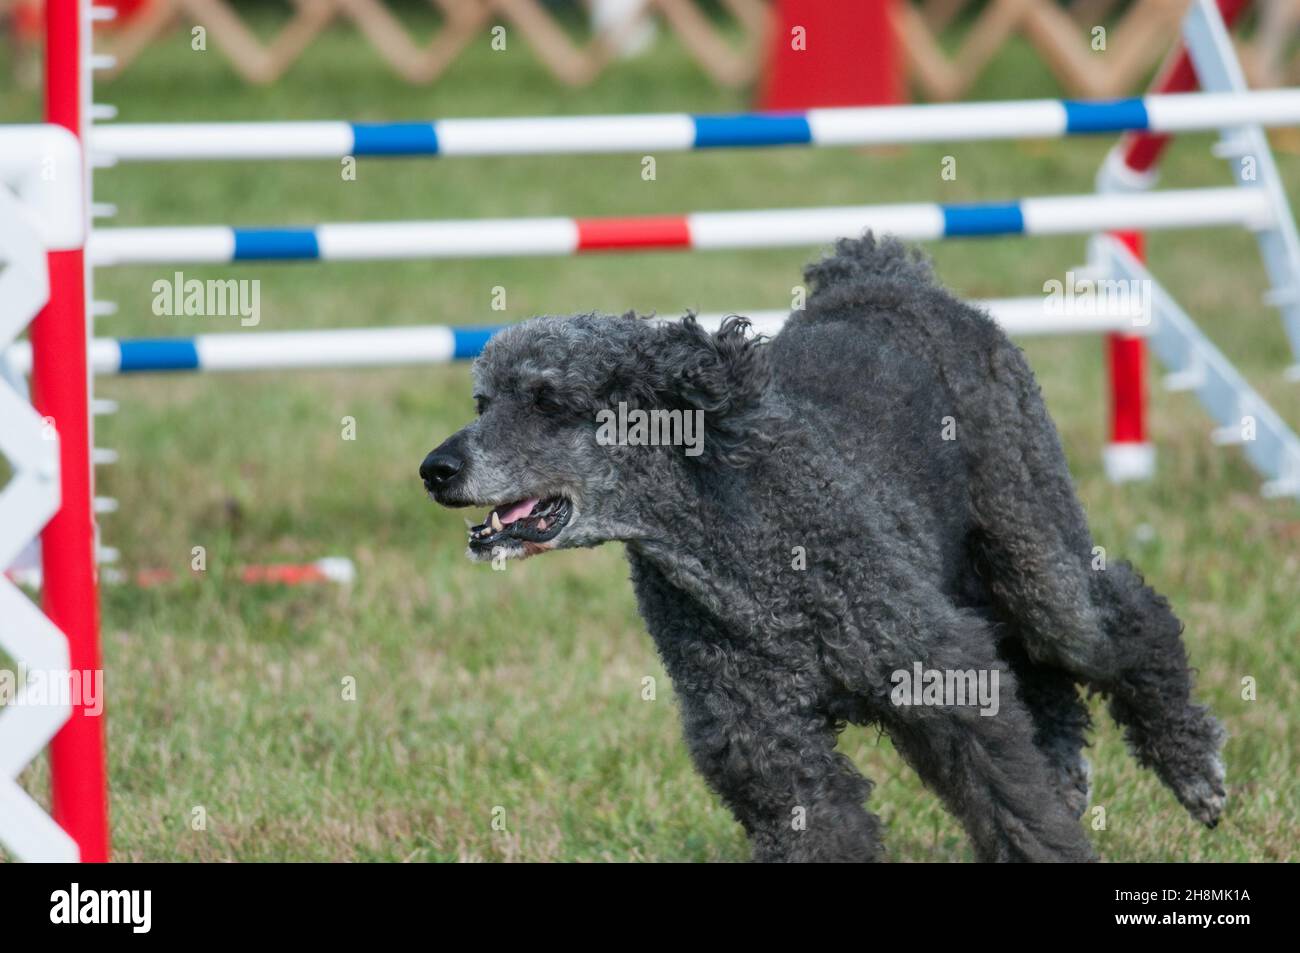 Standard Poodle clearing hurdle during agility competition Stock Photo